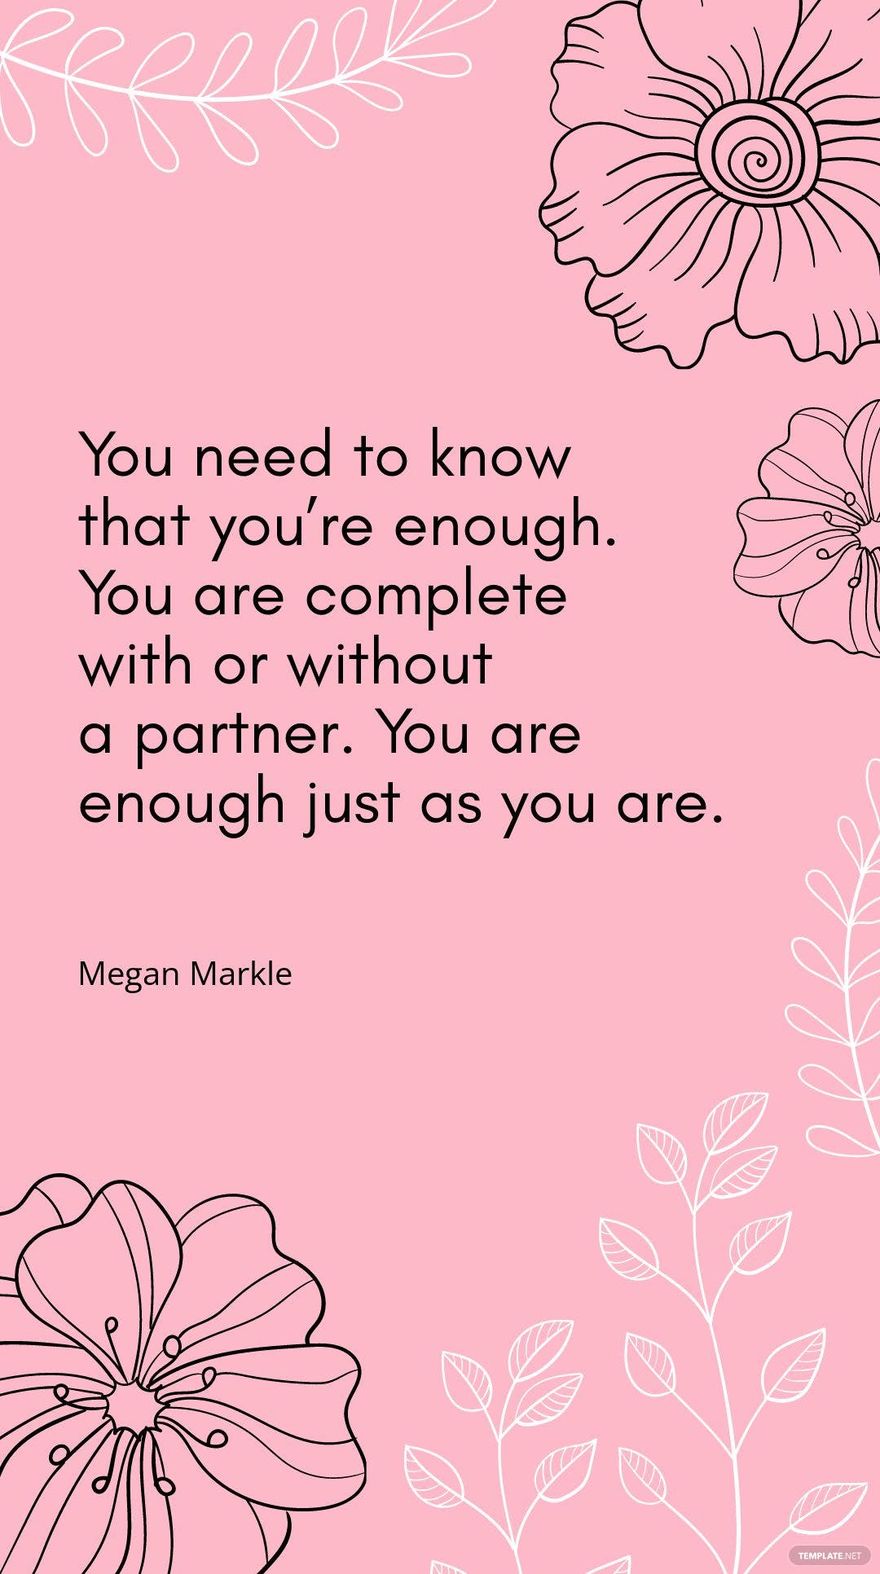 Megan Markle - “You need to know that you’re enough. You are complete with or without a partner. You are enough just as you are.”